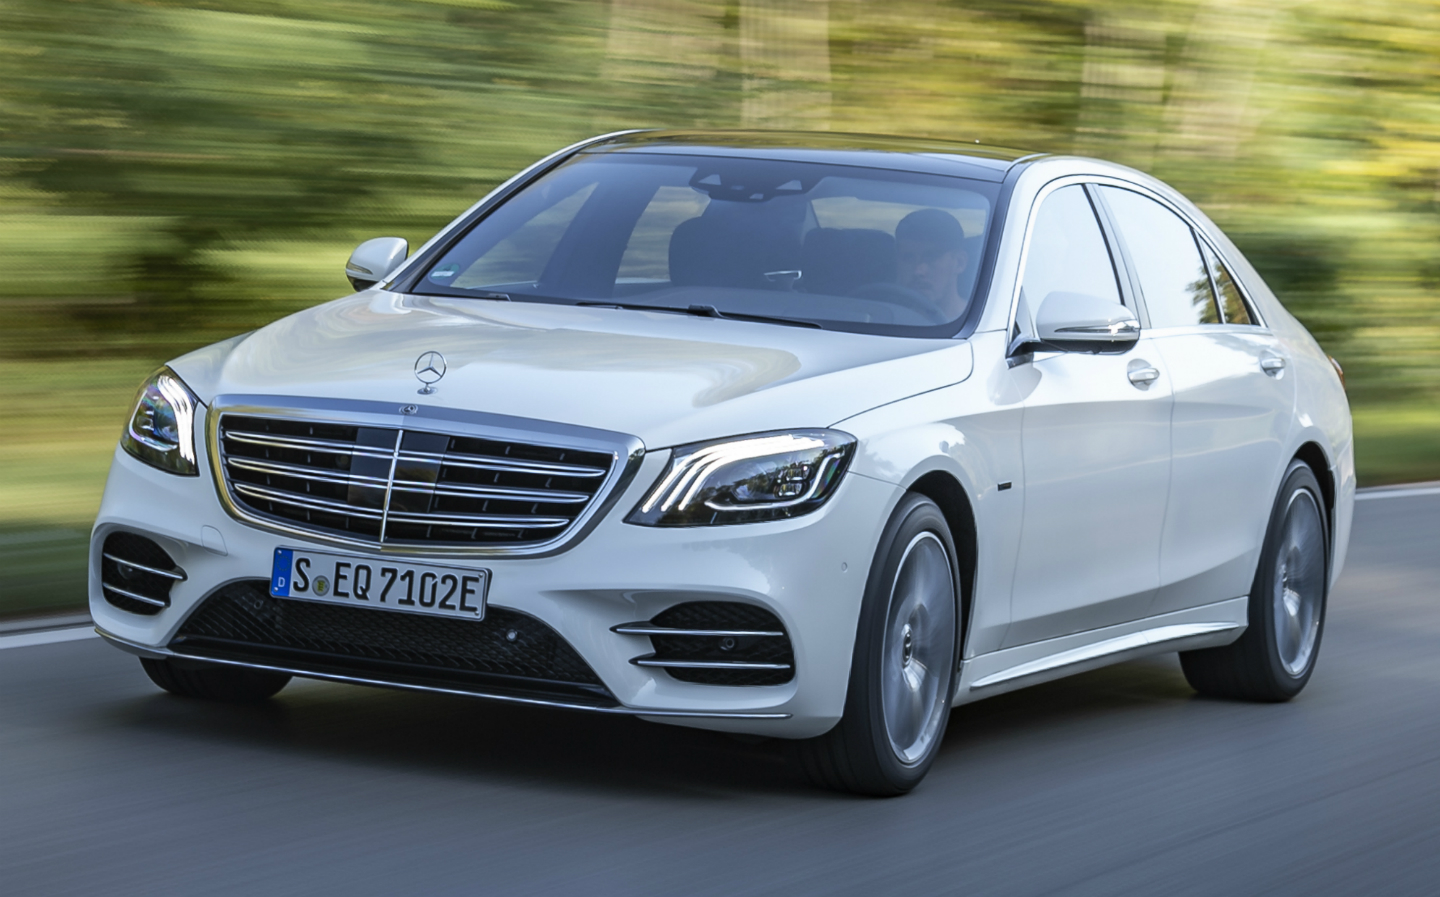 Jeremy Clarkson: the hybrid Mercedes-Benz S-Class is like a private jet with number plates